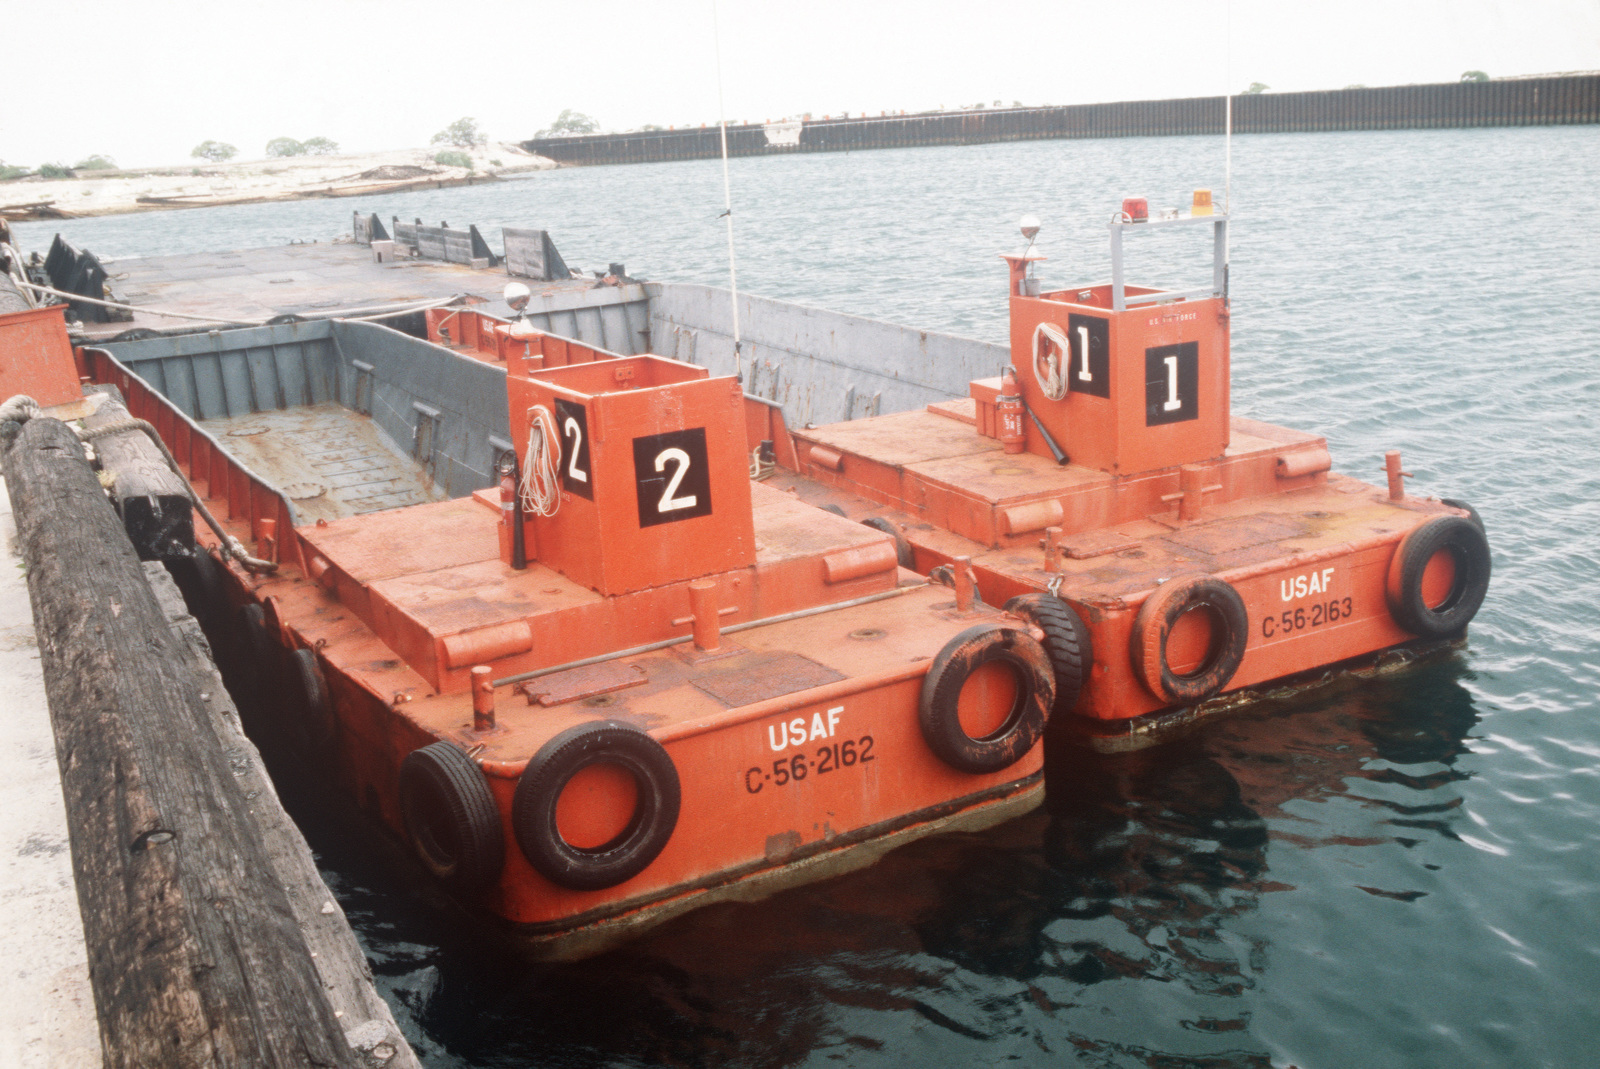 Two US Air Force LCM 6 landing craft docked at a pier - NARA & DVIDS